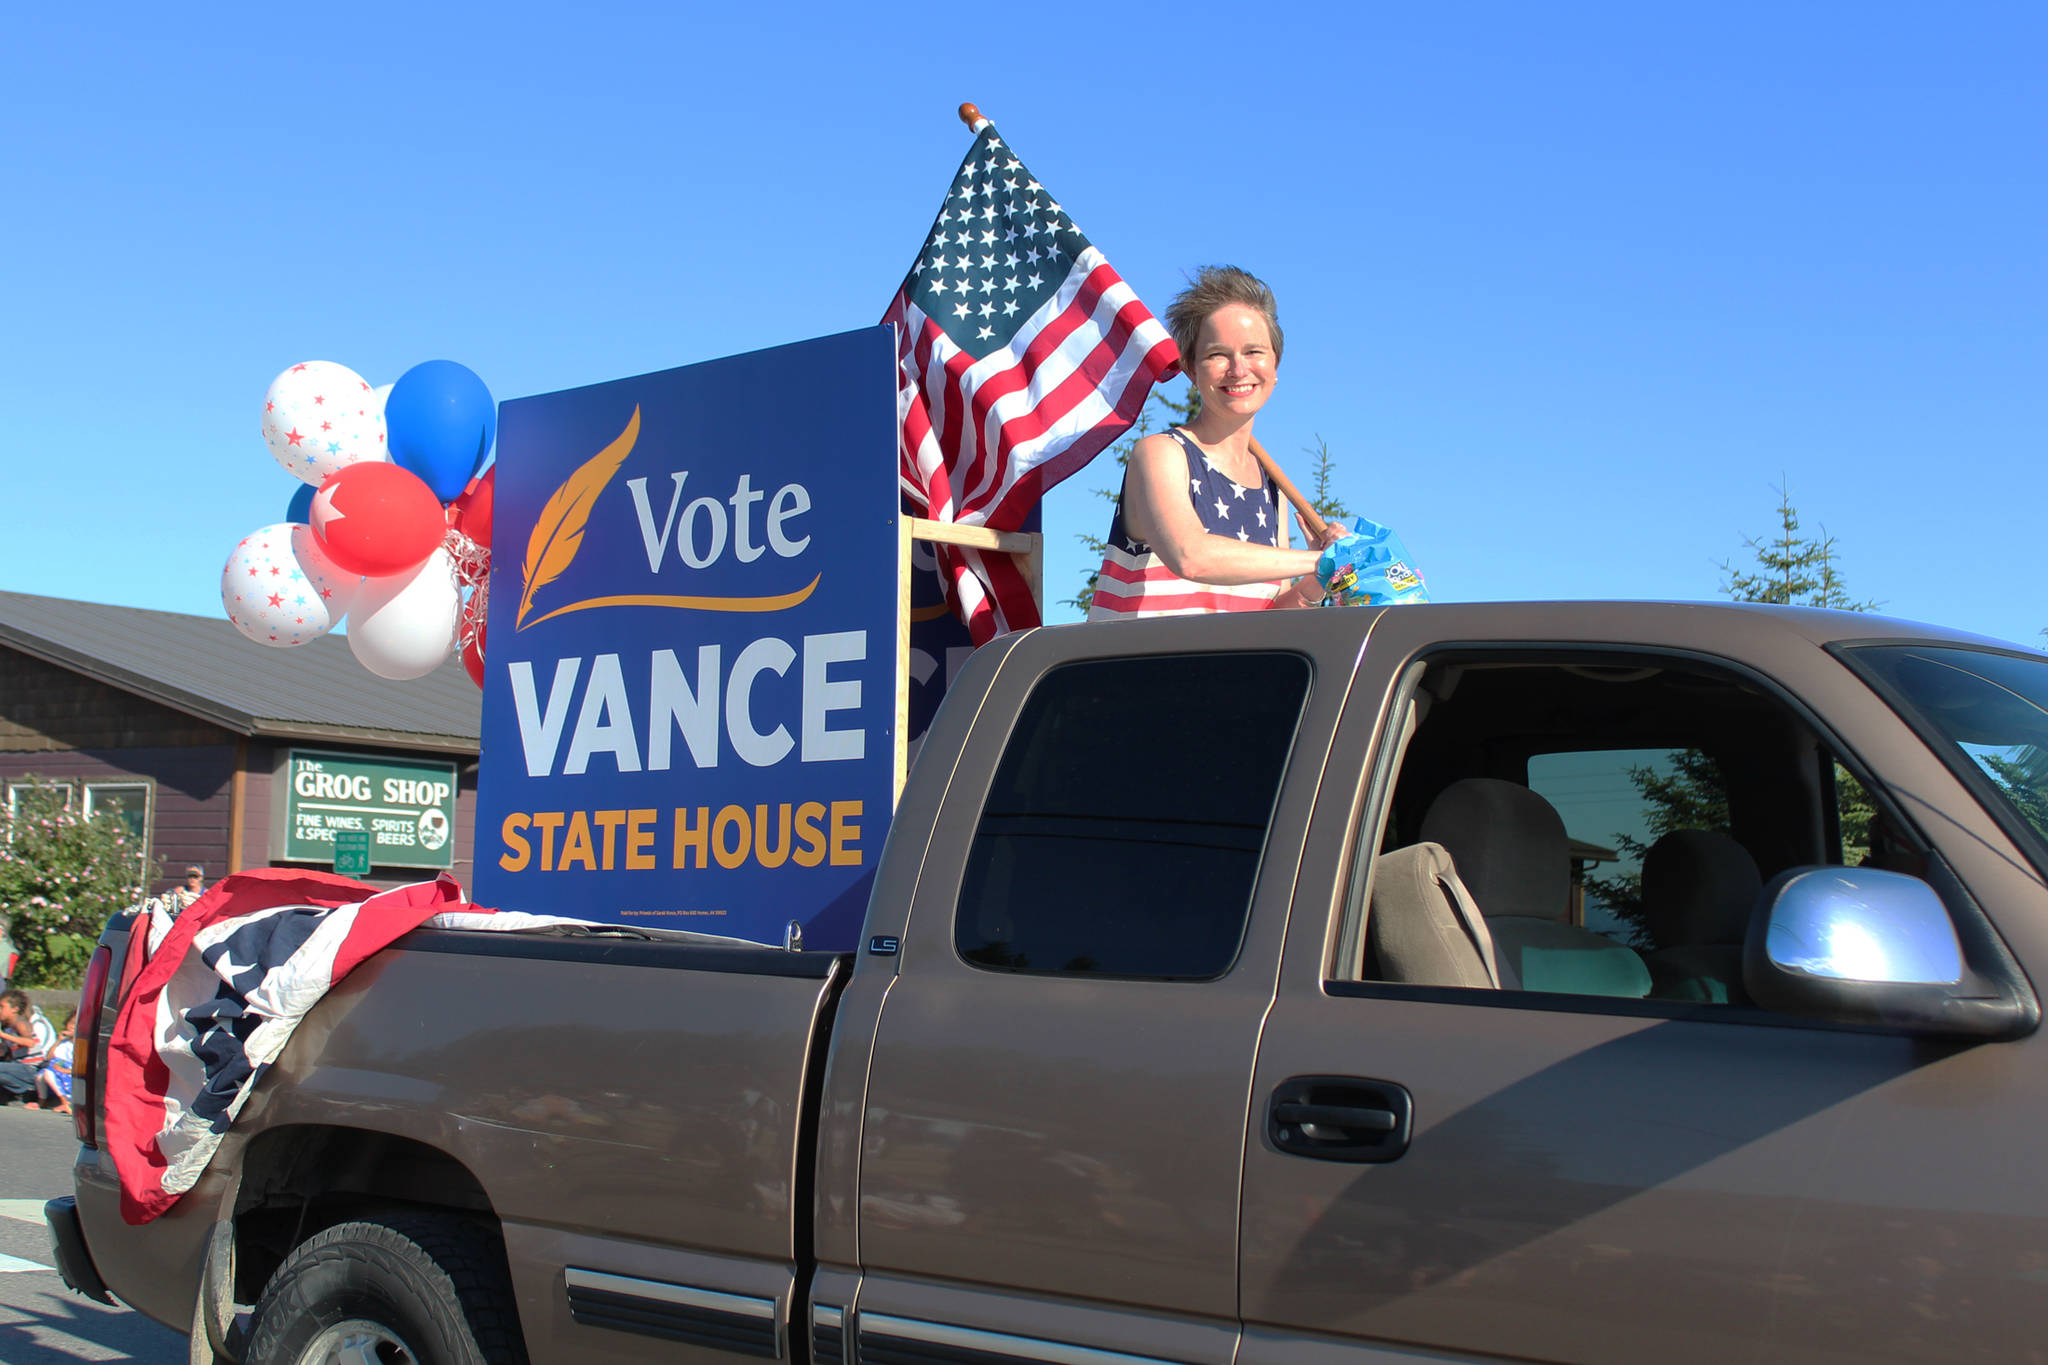 Sarah Vance’s lead grows in GOP primary after initial absentee ballot count